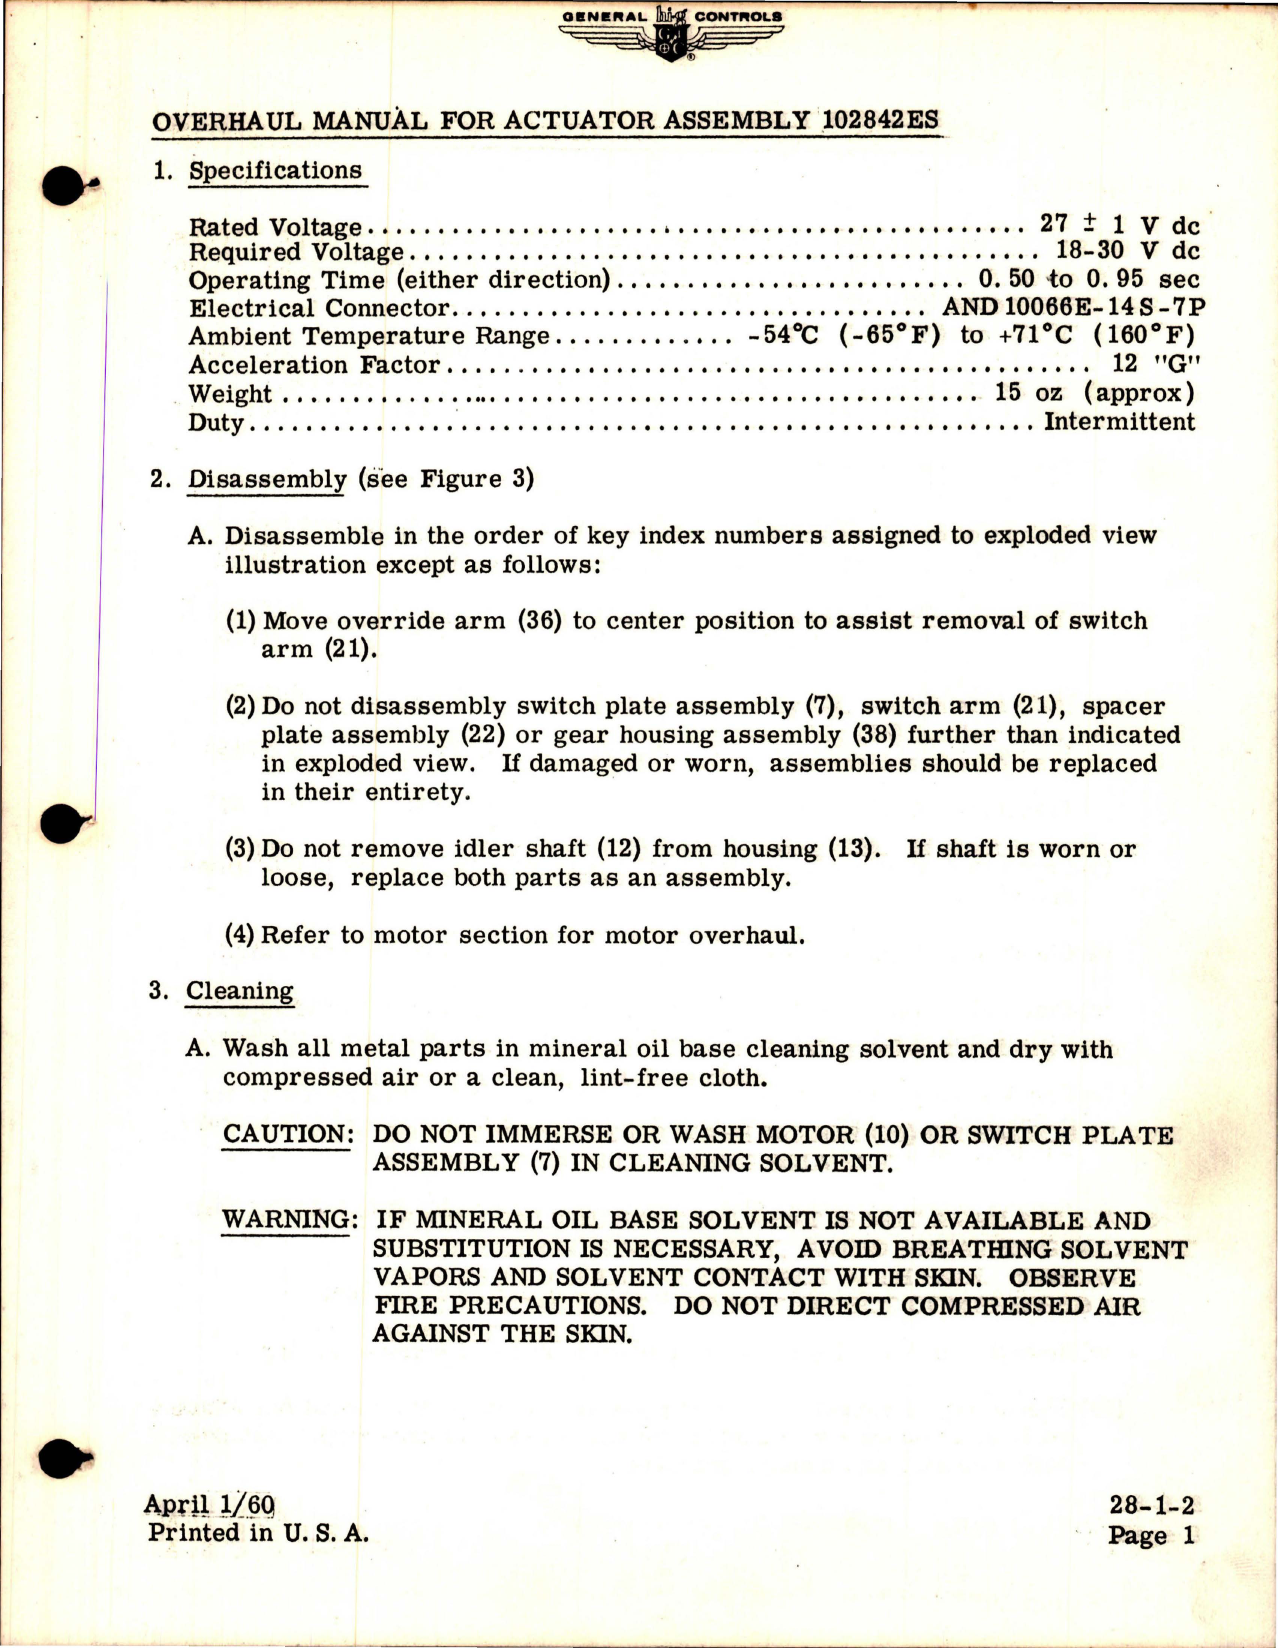 Sample page 1 from AirCorps Library document: Overhaul Manual for Actuator Assembly - 102842ES